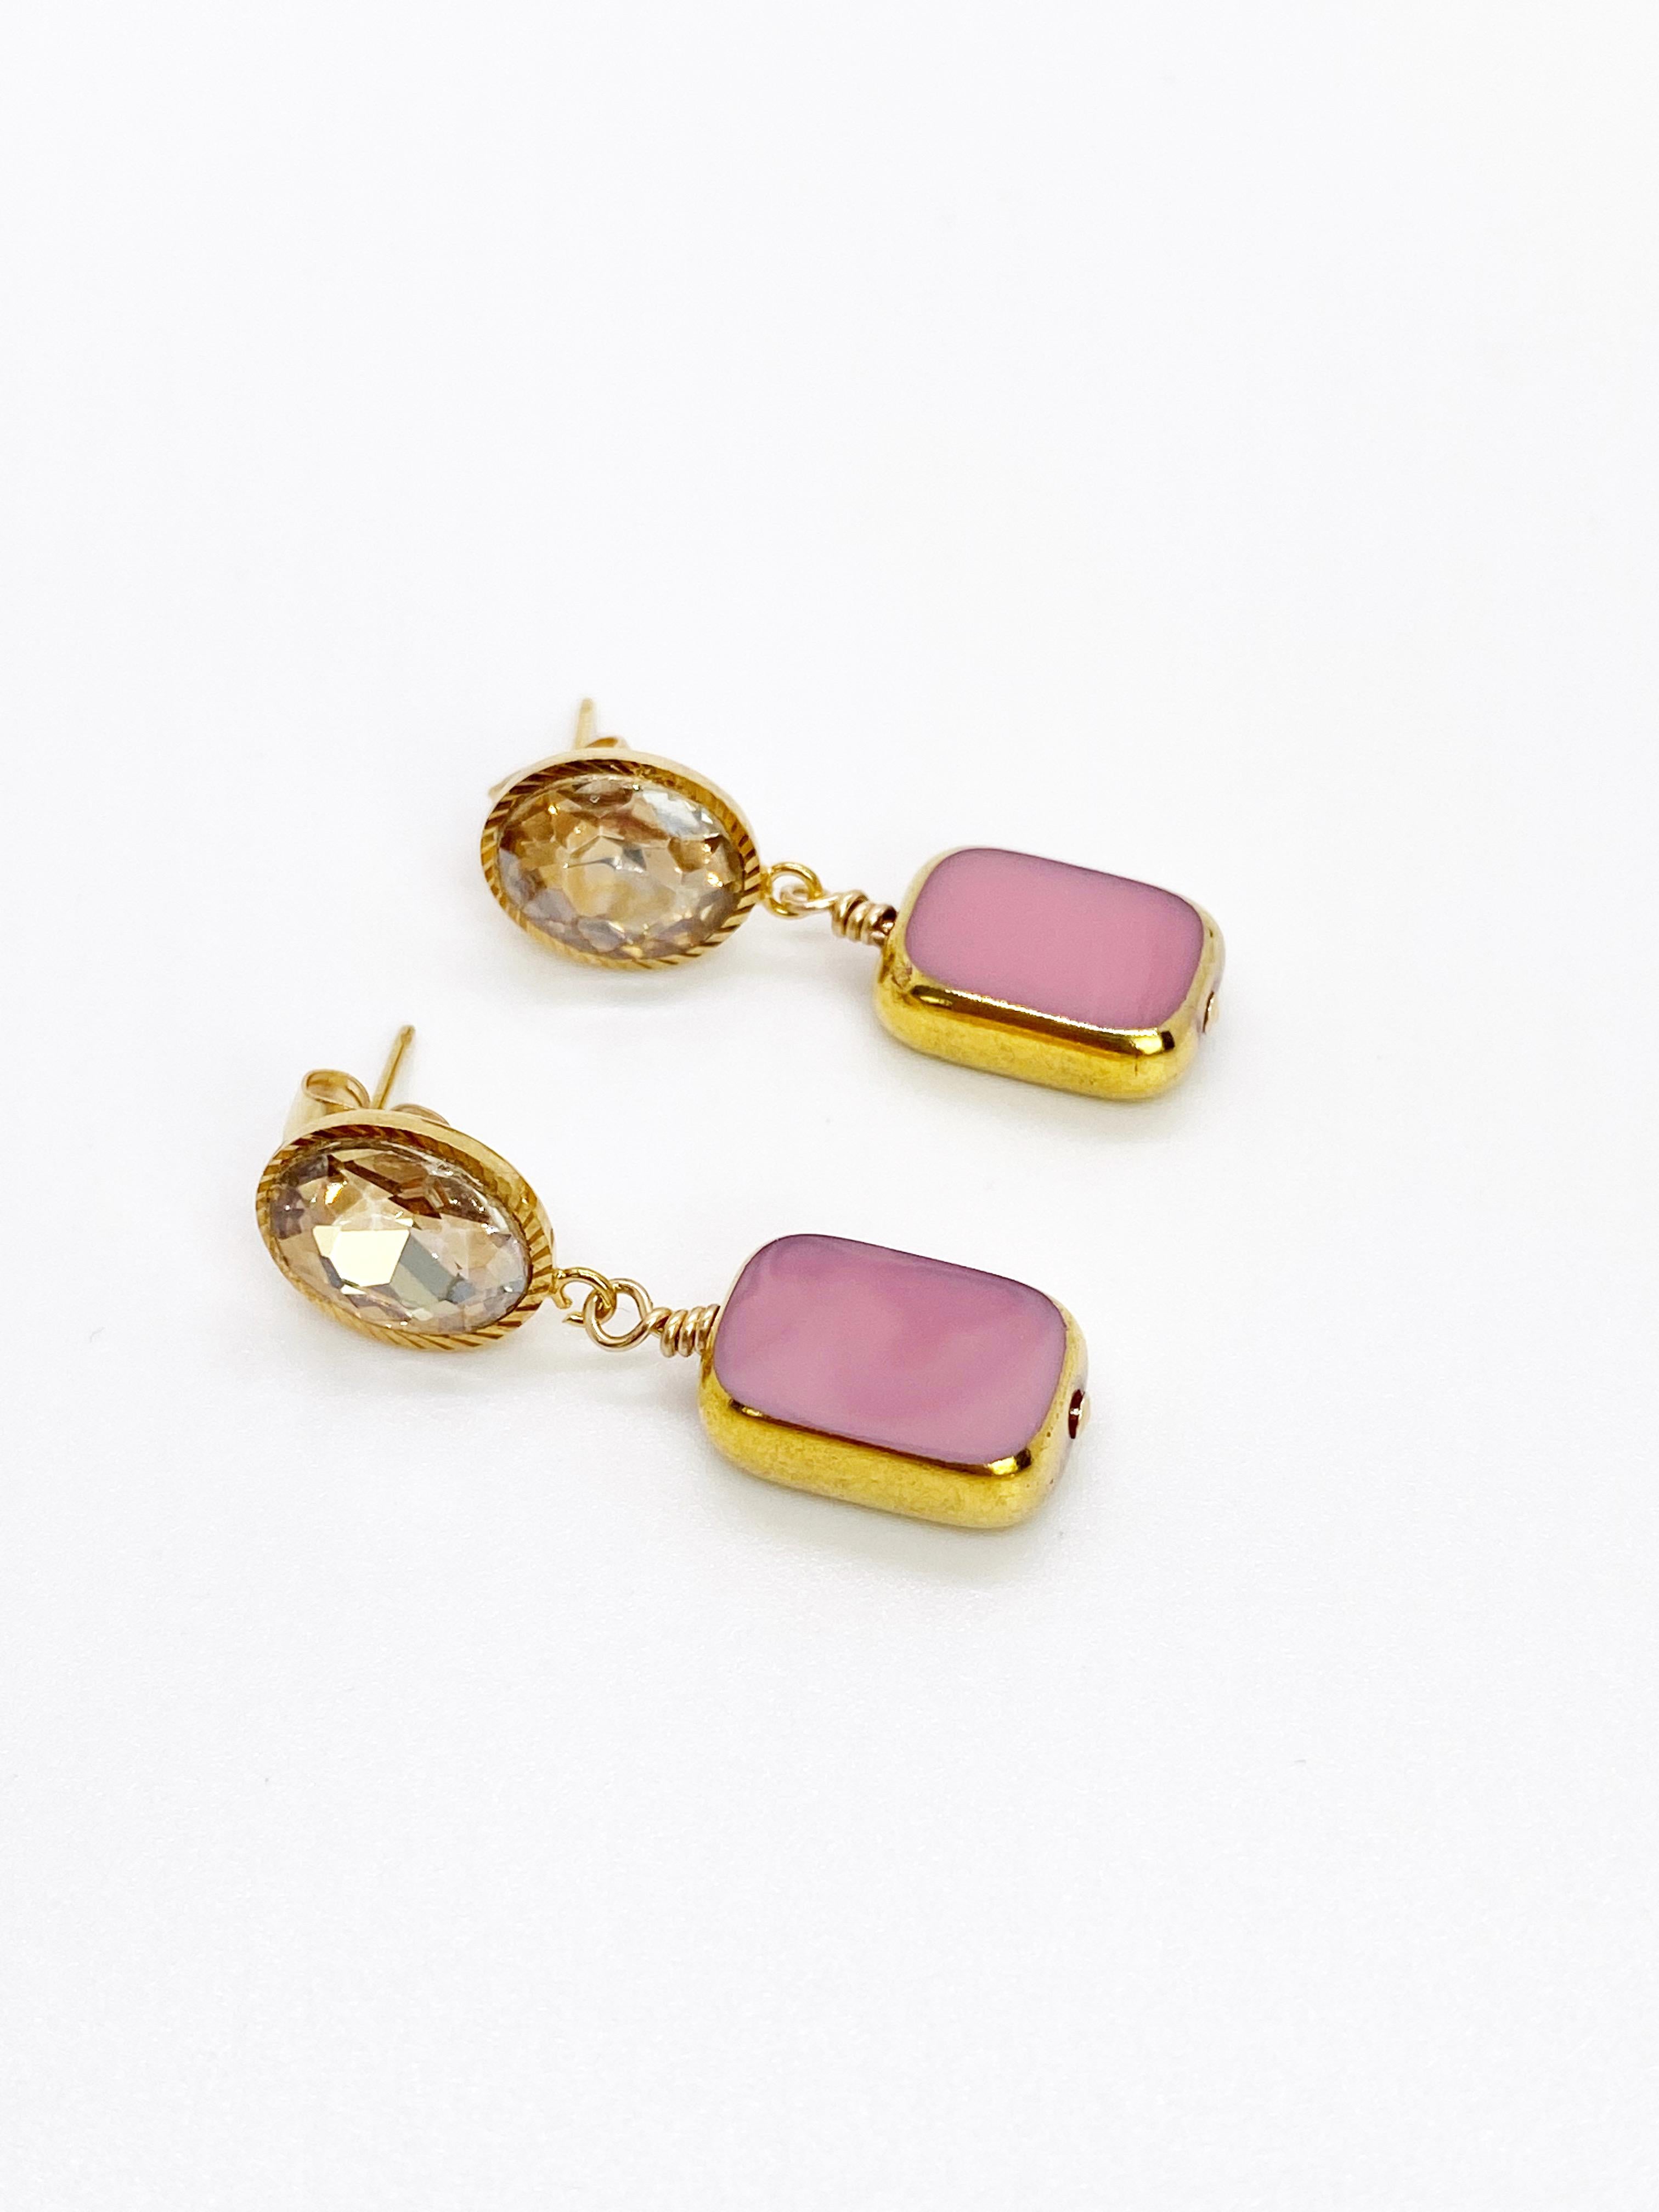 Contemporary Vintage German Glass Beads edged with 24K gold, Pastel Pink Earrings For Sale